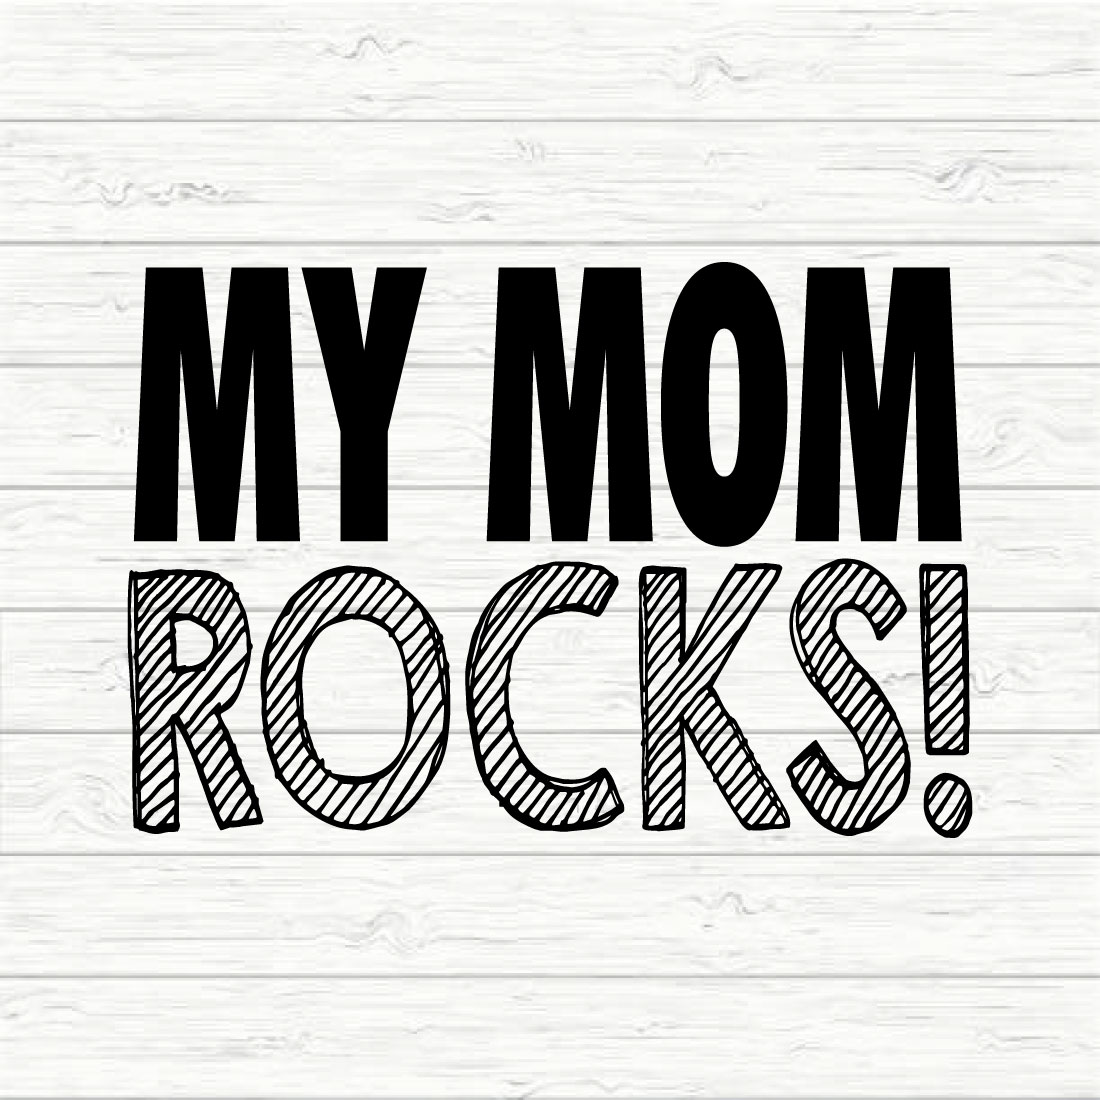 My Mom Rocks preview image.